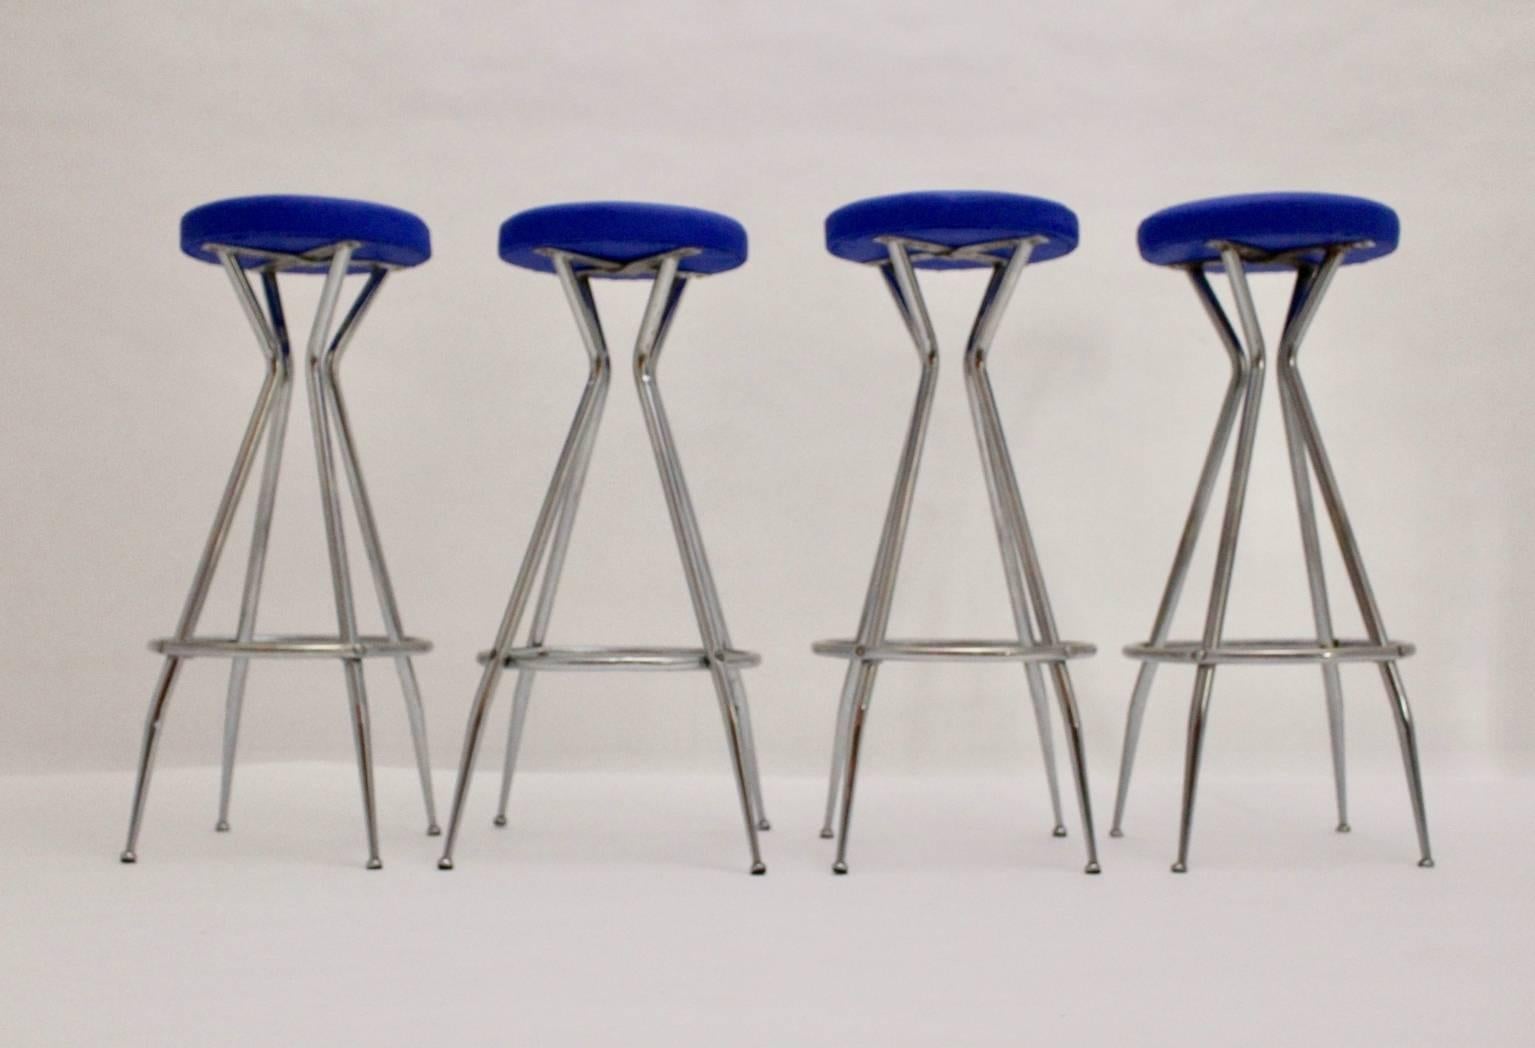 Mid Century Moder set of 4 barstools from chromed tube steel 1950s Austria.
The seat is covered with faux leather in a bold blue color tone.

The surface and the base of this set is in very good condition. The base has minor signs of age and